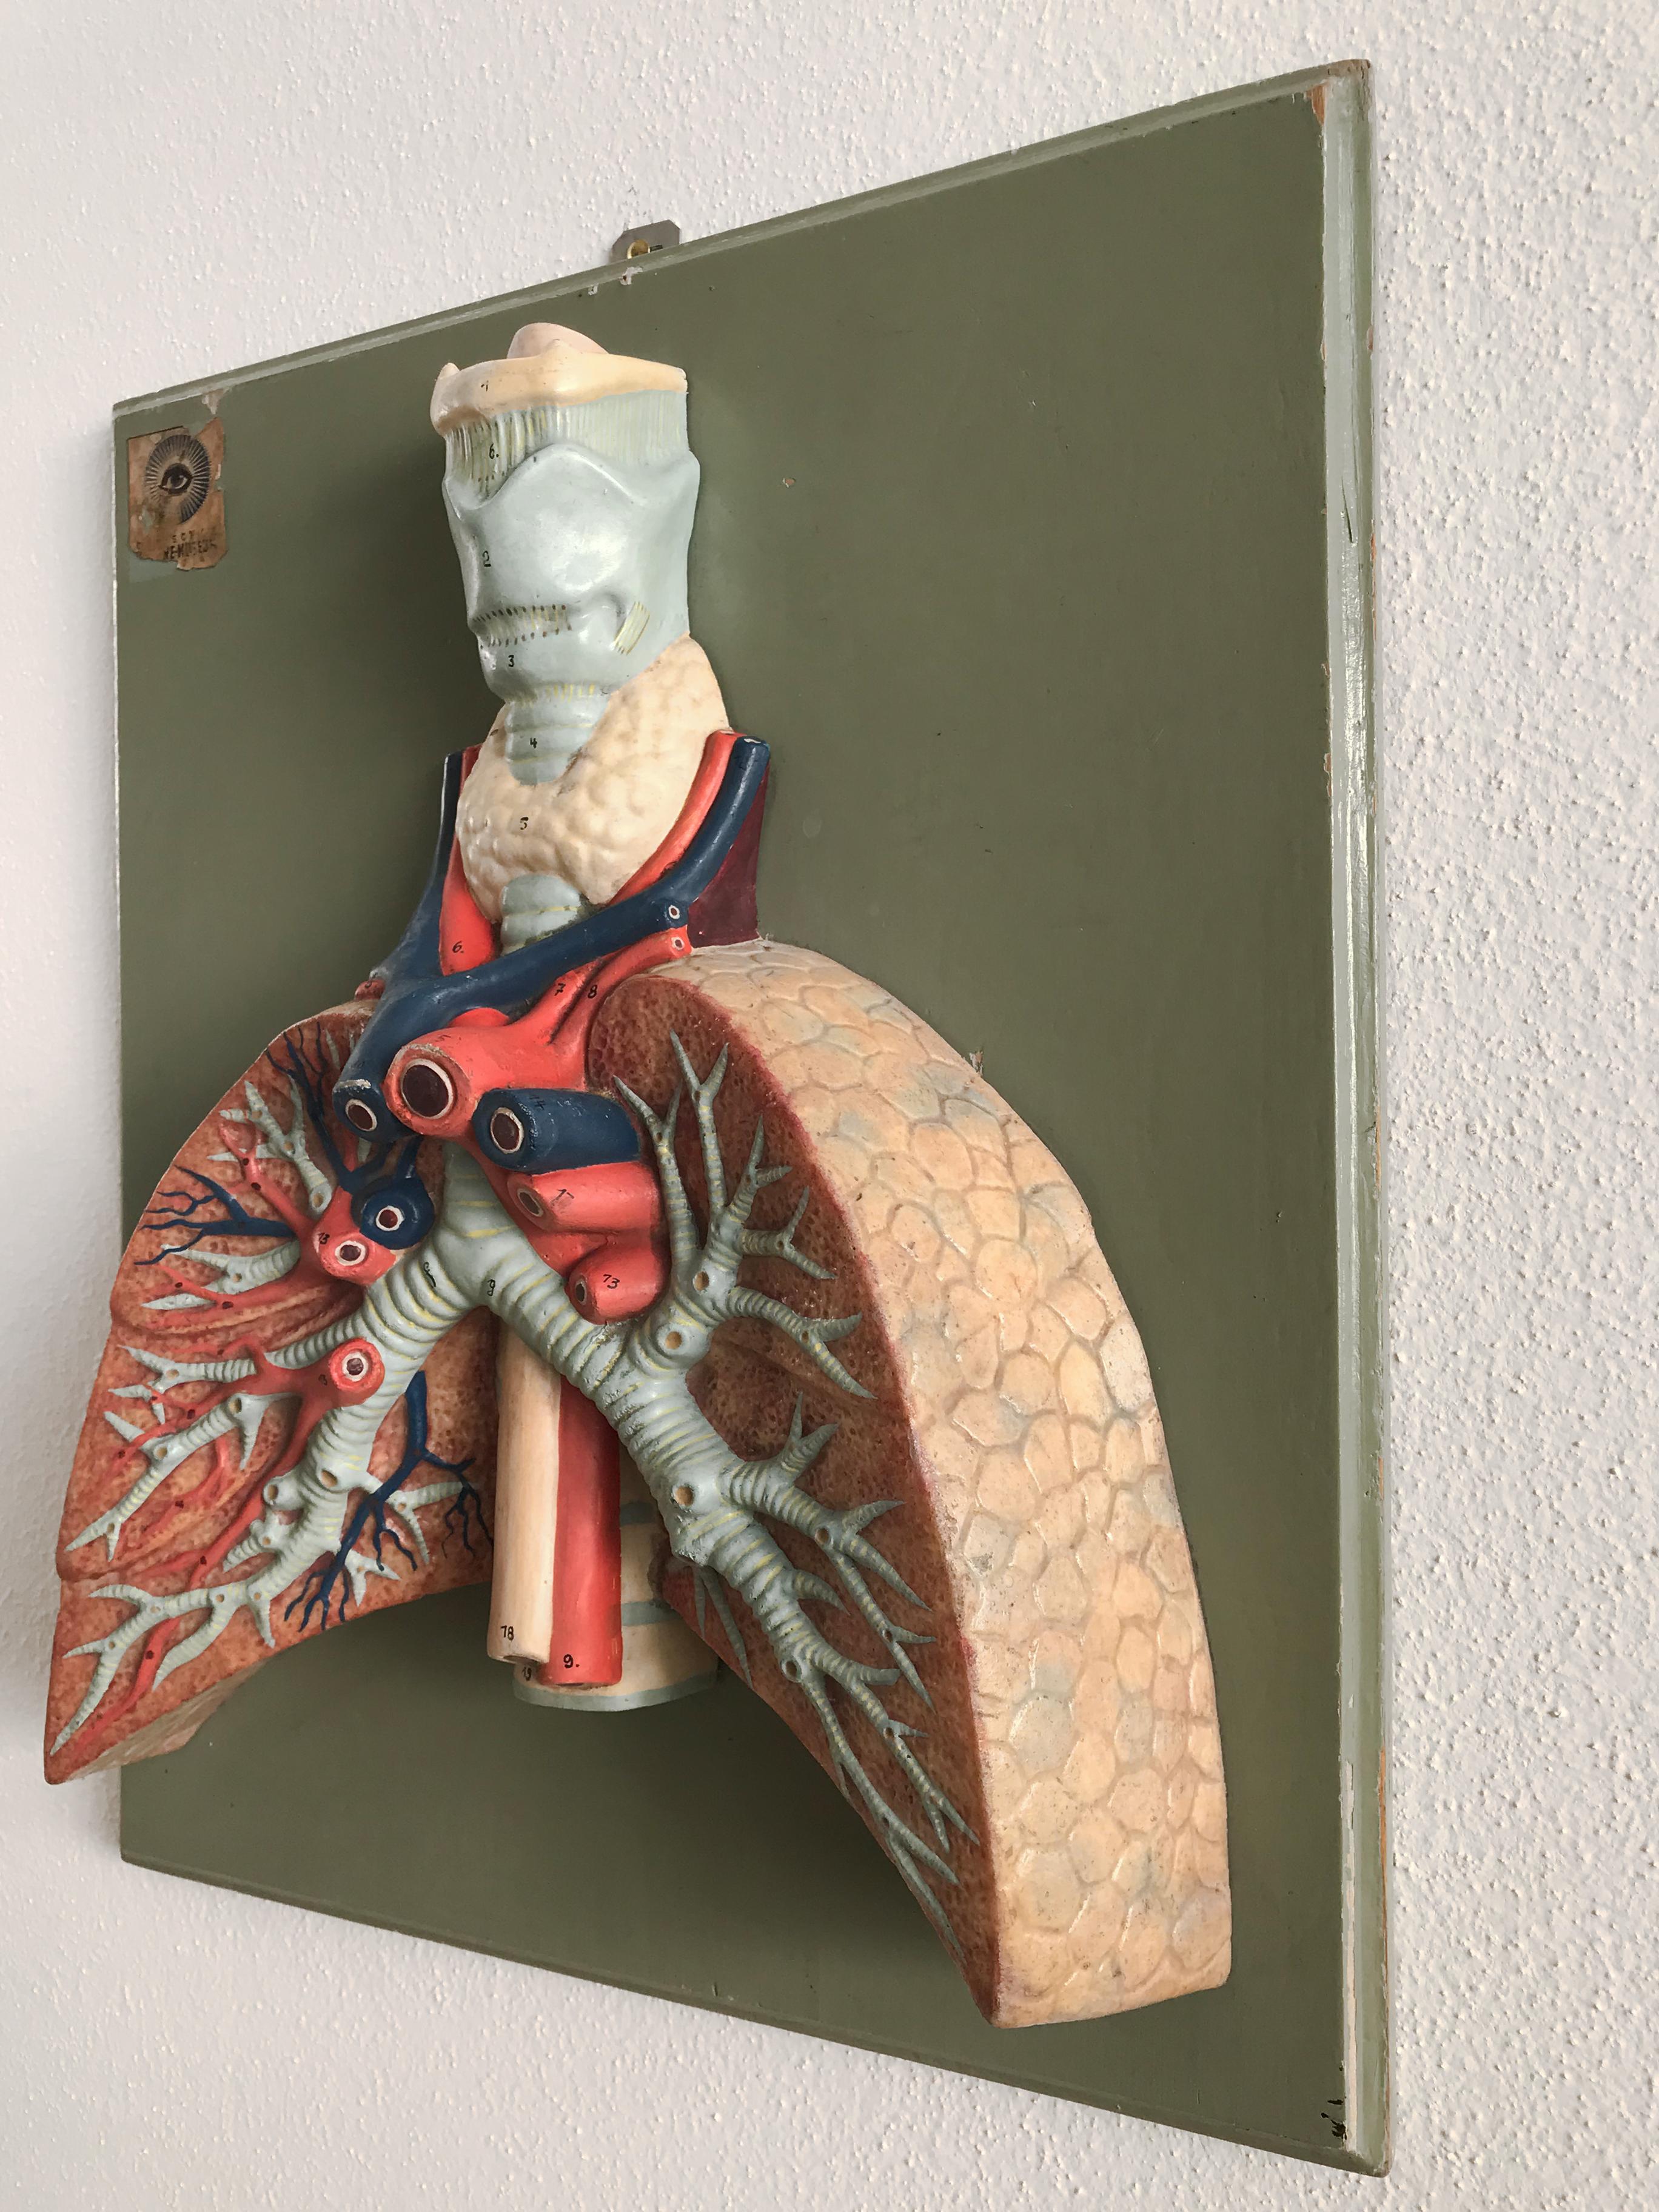 Midcentury three-dimensional anatomical plaster painting representing human respiratory system, provenance Hygiene Museum Dresden with museum sticker label, Germany 1950s
Please note that the item is original of the period and this shows normal